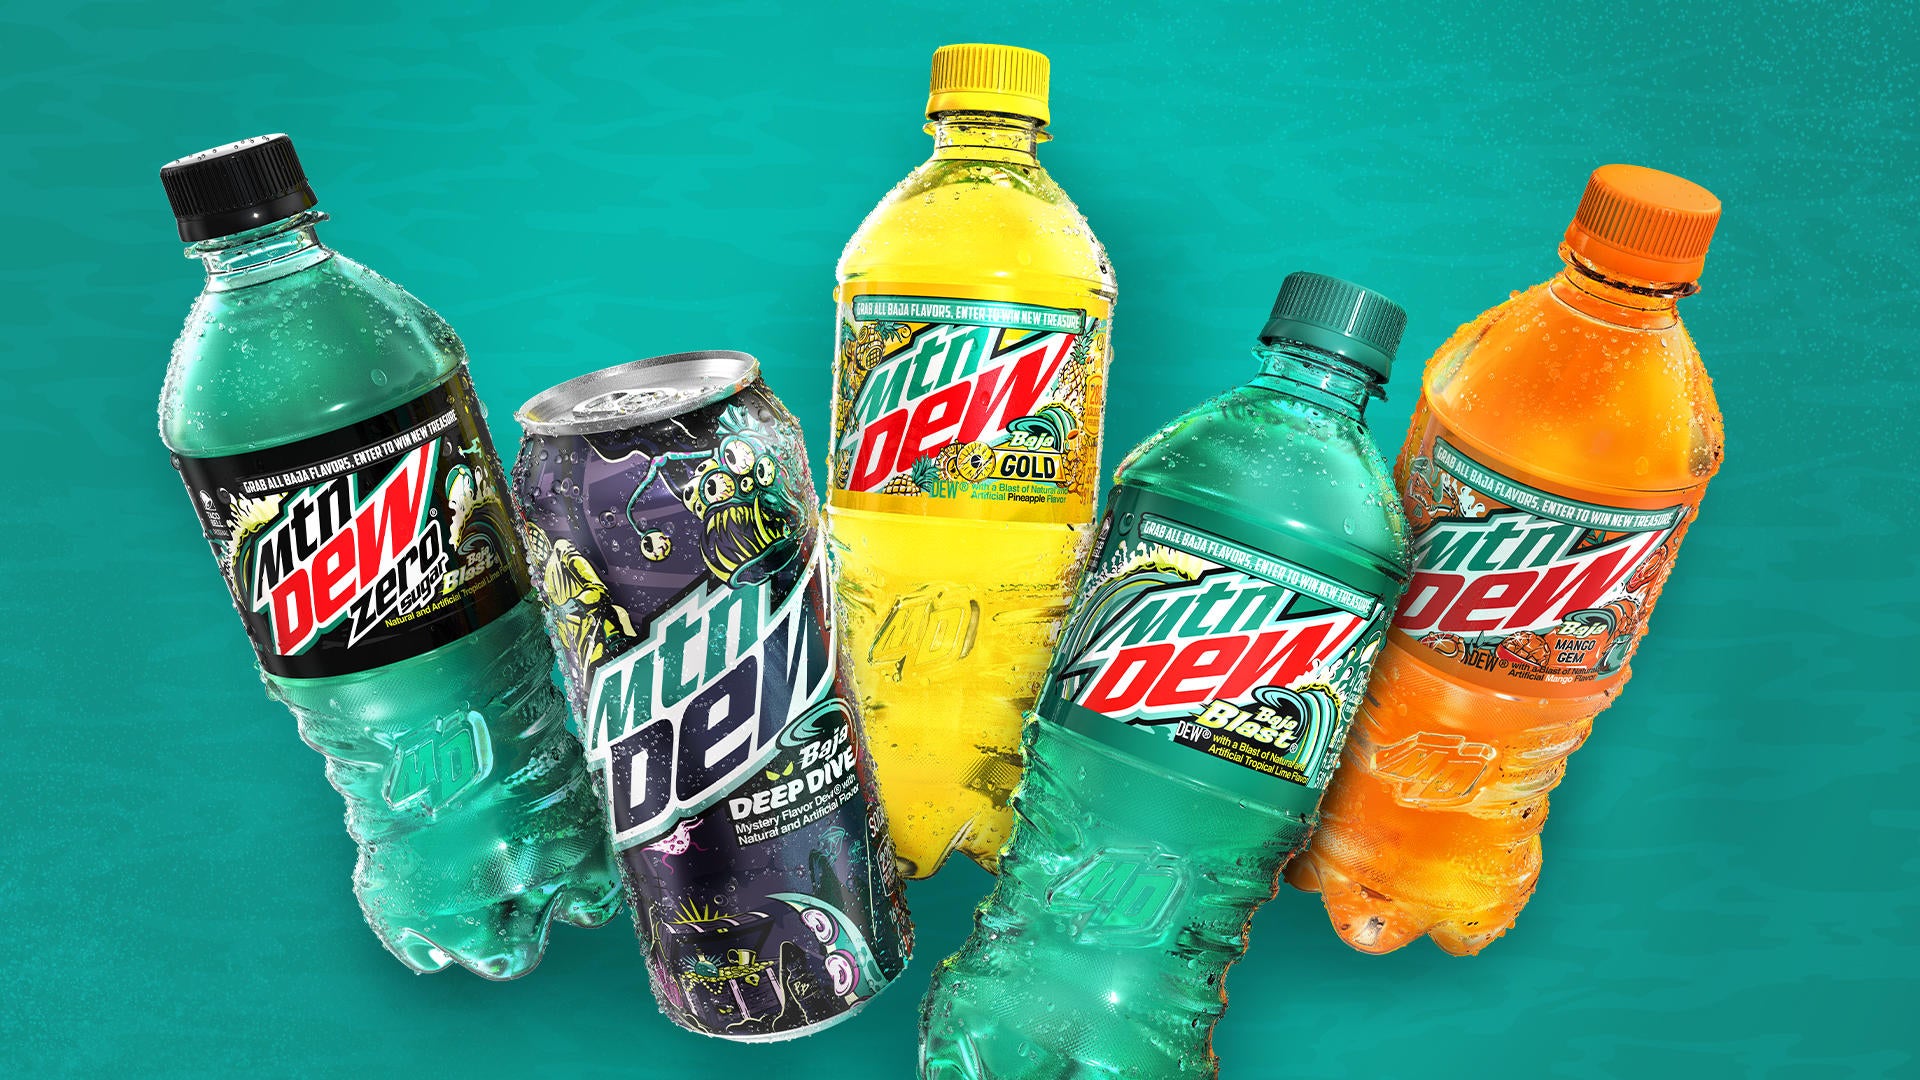 MTN DEW Baja Blast Returns to Stores With Three New "Spinoff" Flavors